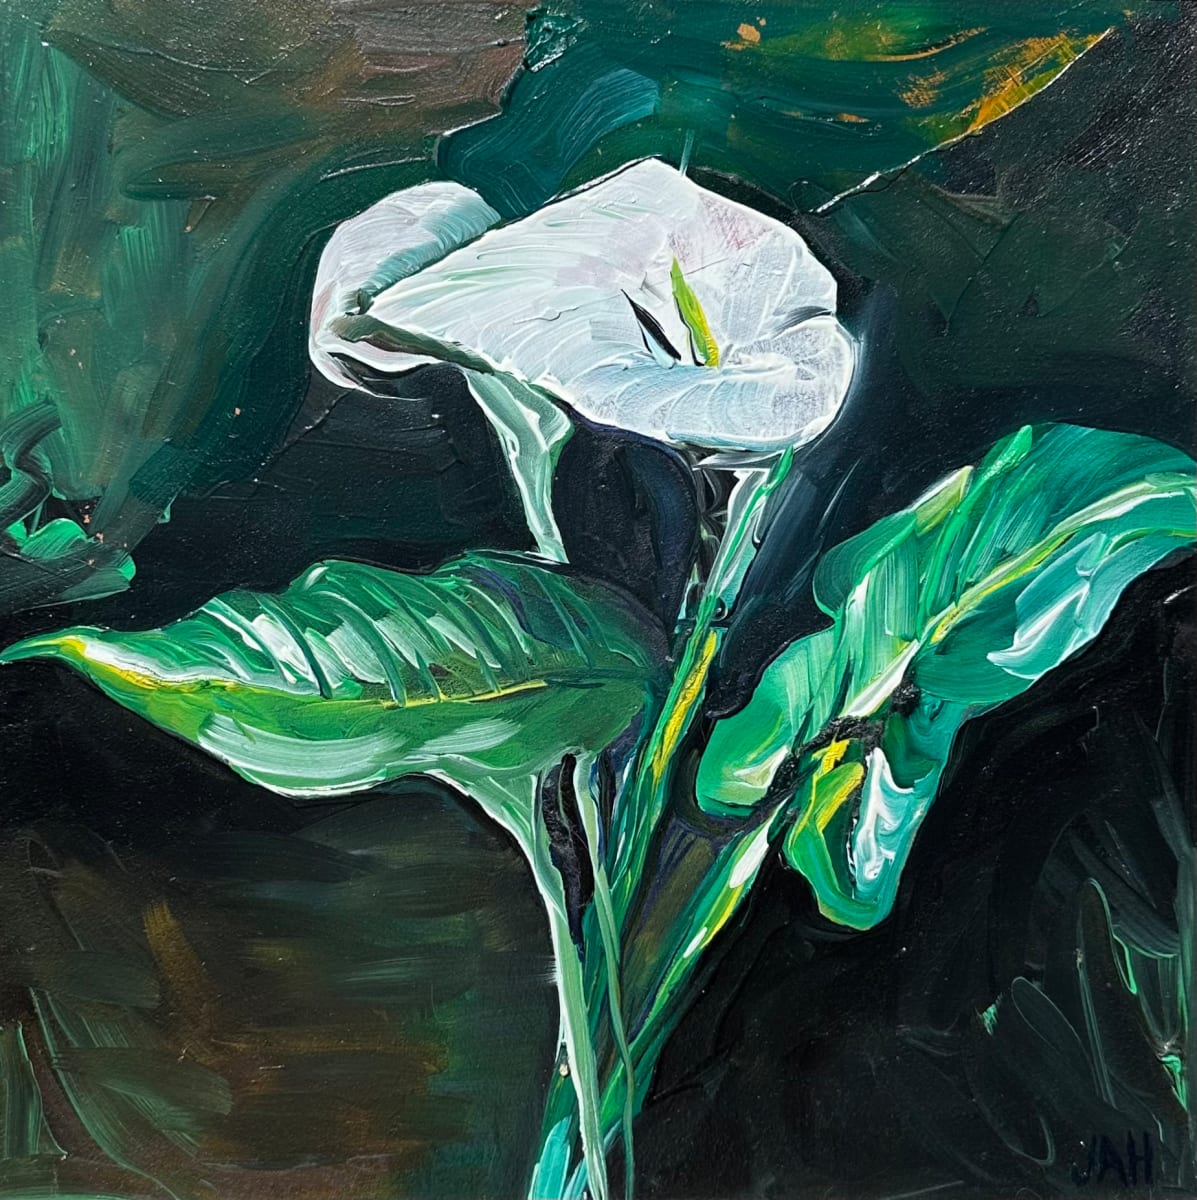 Calla Lilly by Judith Hutcheson 